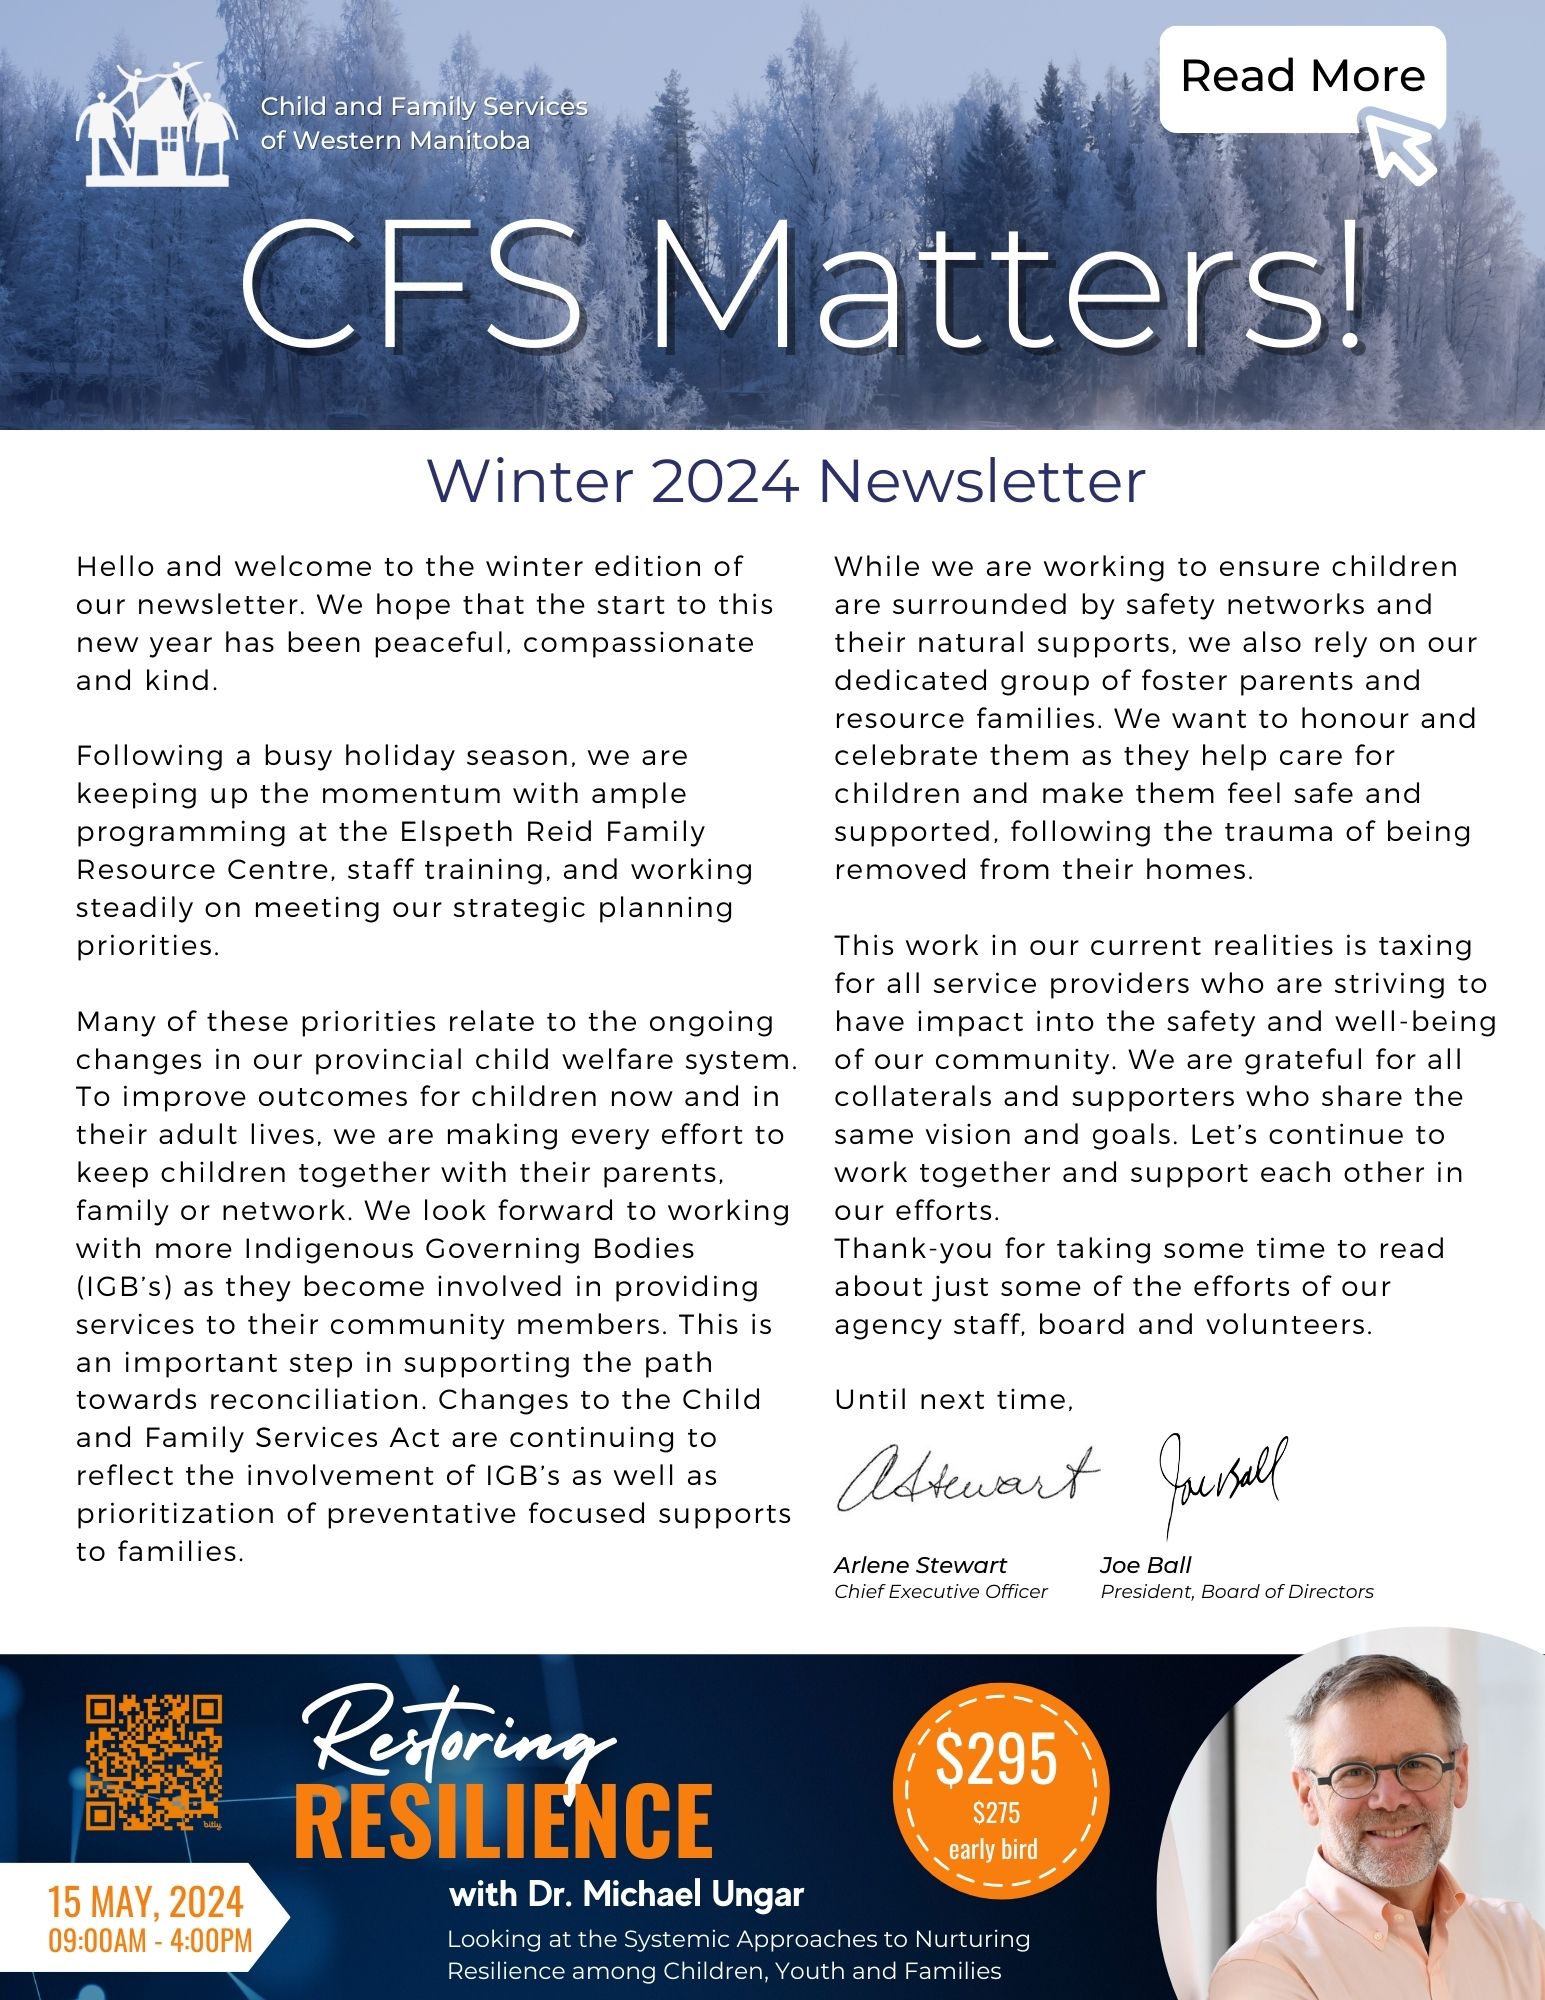 Newsletter cover with welcome message and advert for upcoming spring 2024 annual conference on restoring resilience.